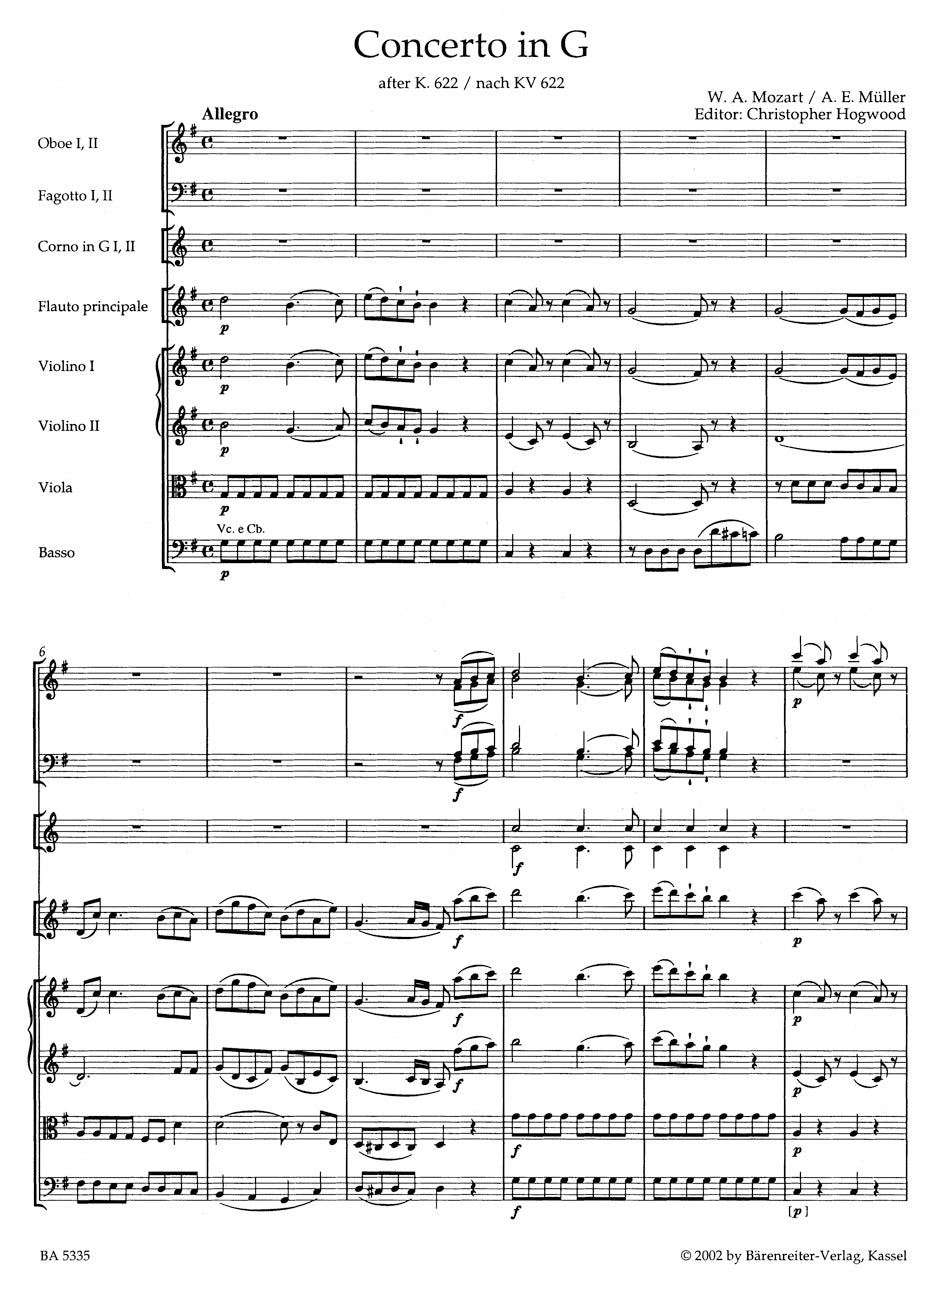 Mozart Concerto for Flute and Orchestra G major (1801) -In an arrangement by A. E. Müller after the Clarinet Concerto K. 622-